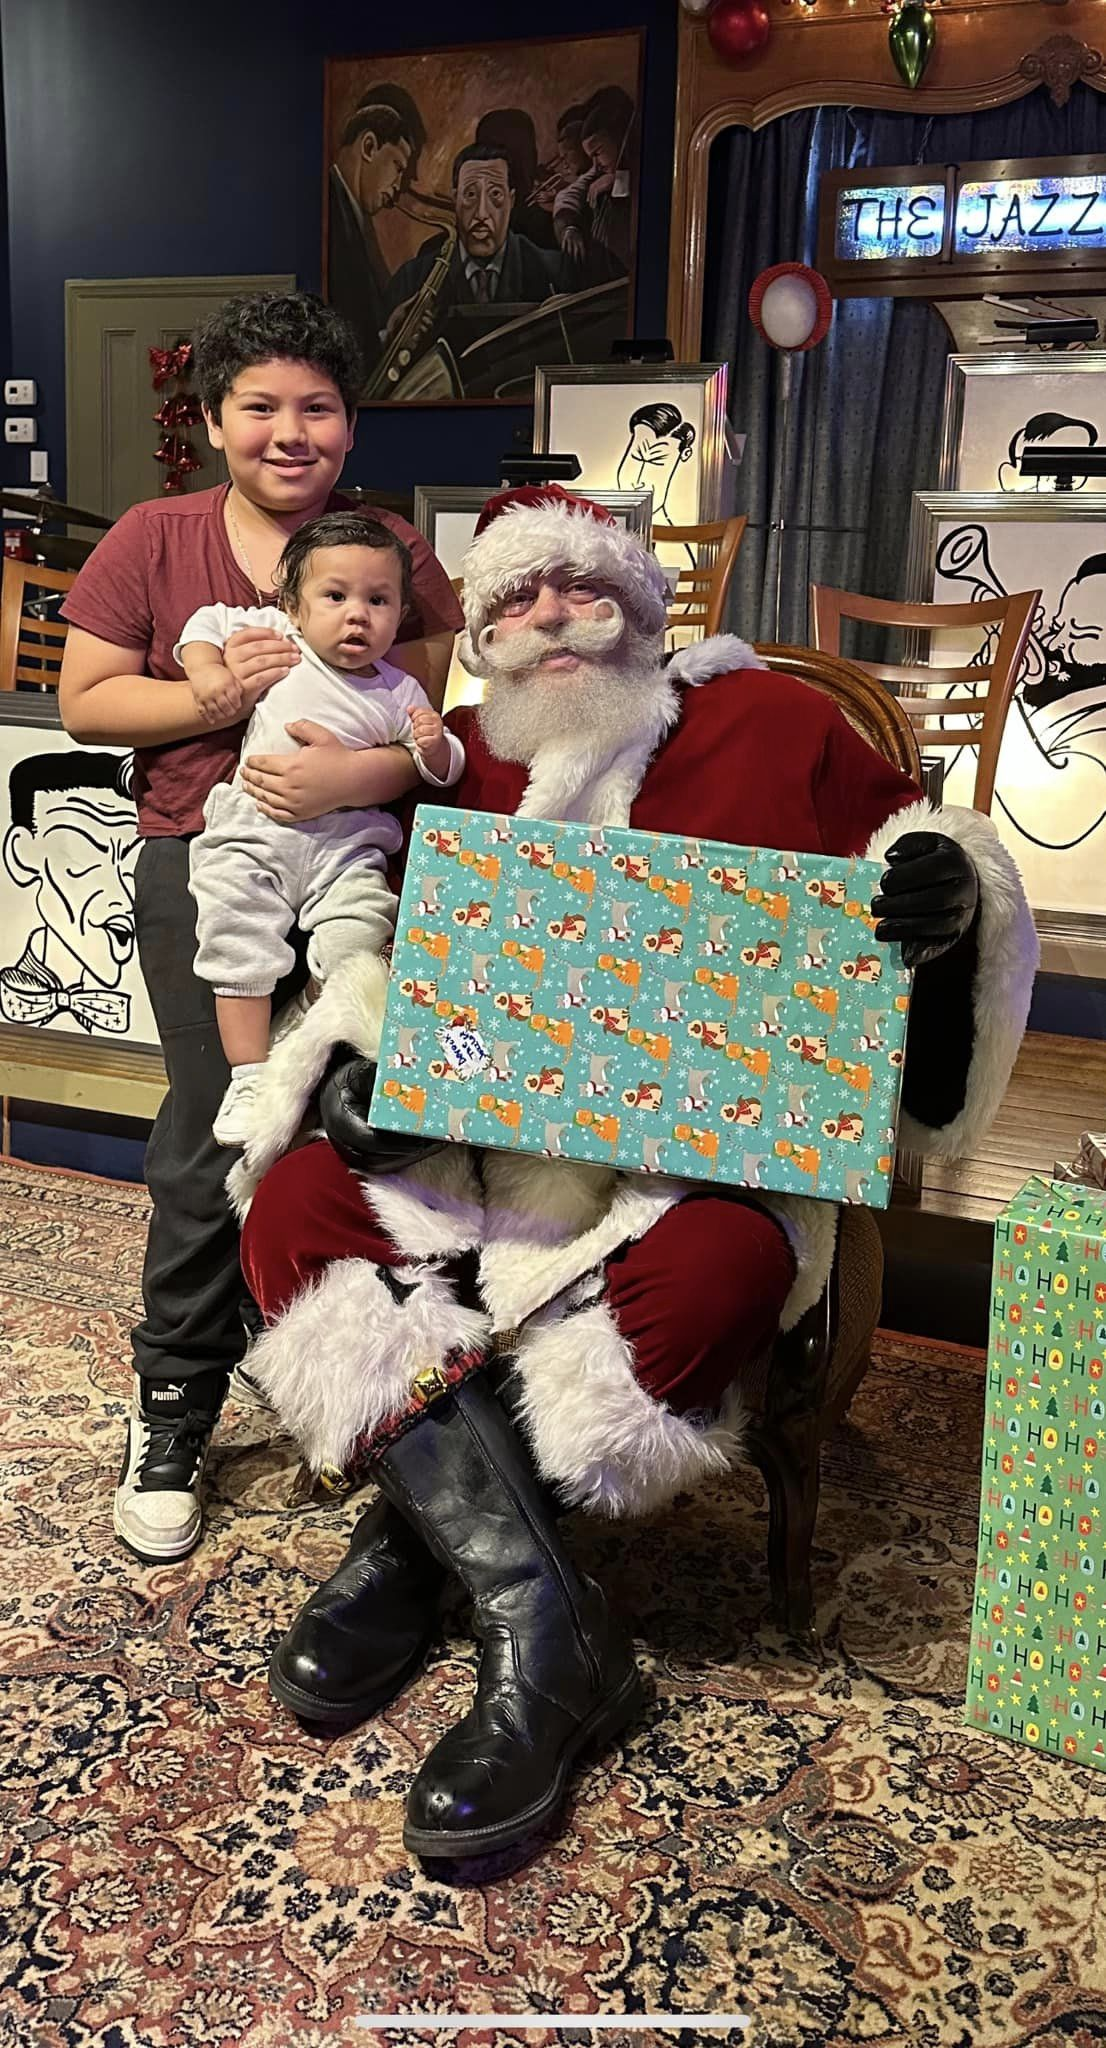 A woman is holding a baby while sitting next to santa claus.